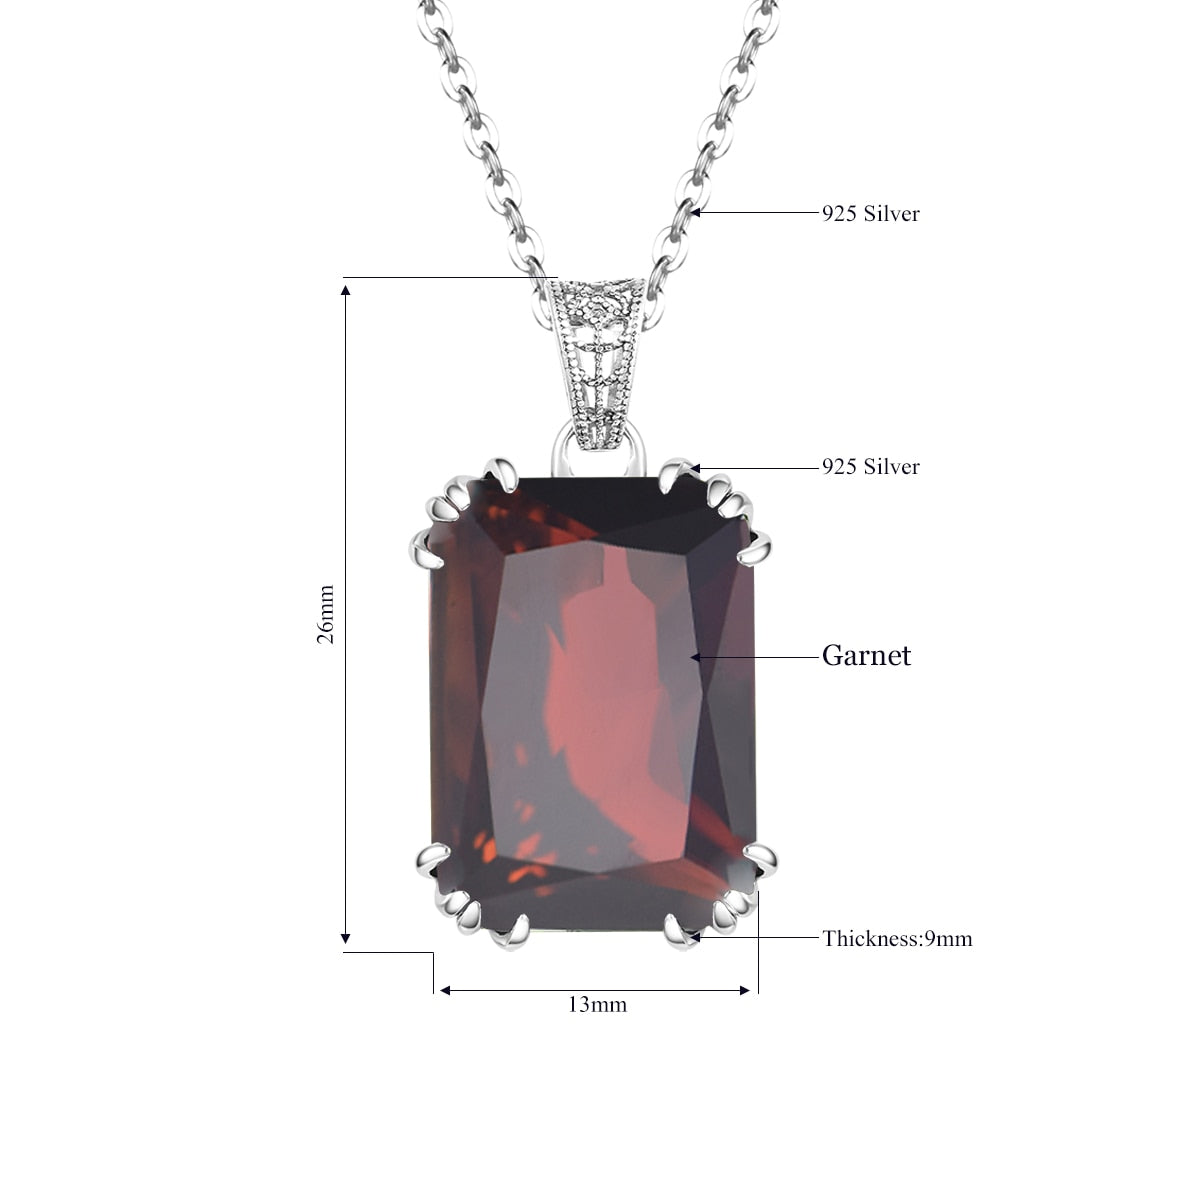 100% Real 925 Sterling Silver Fine Jewelry Necklace Square Garnet Classic Slide Pendants For Women Accessories Silver 925 Gifts